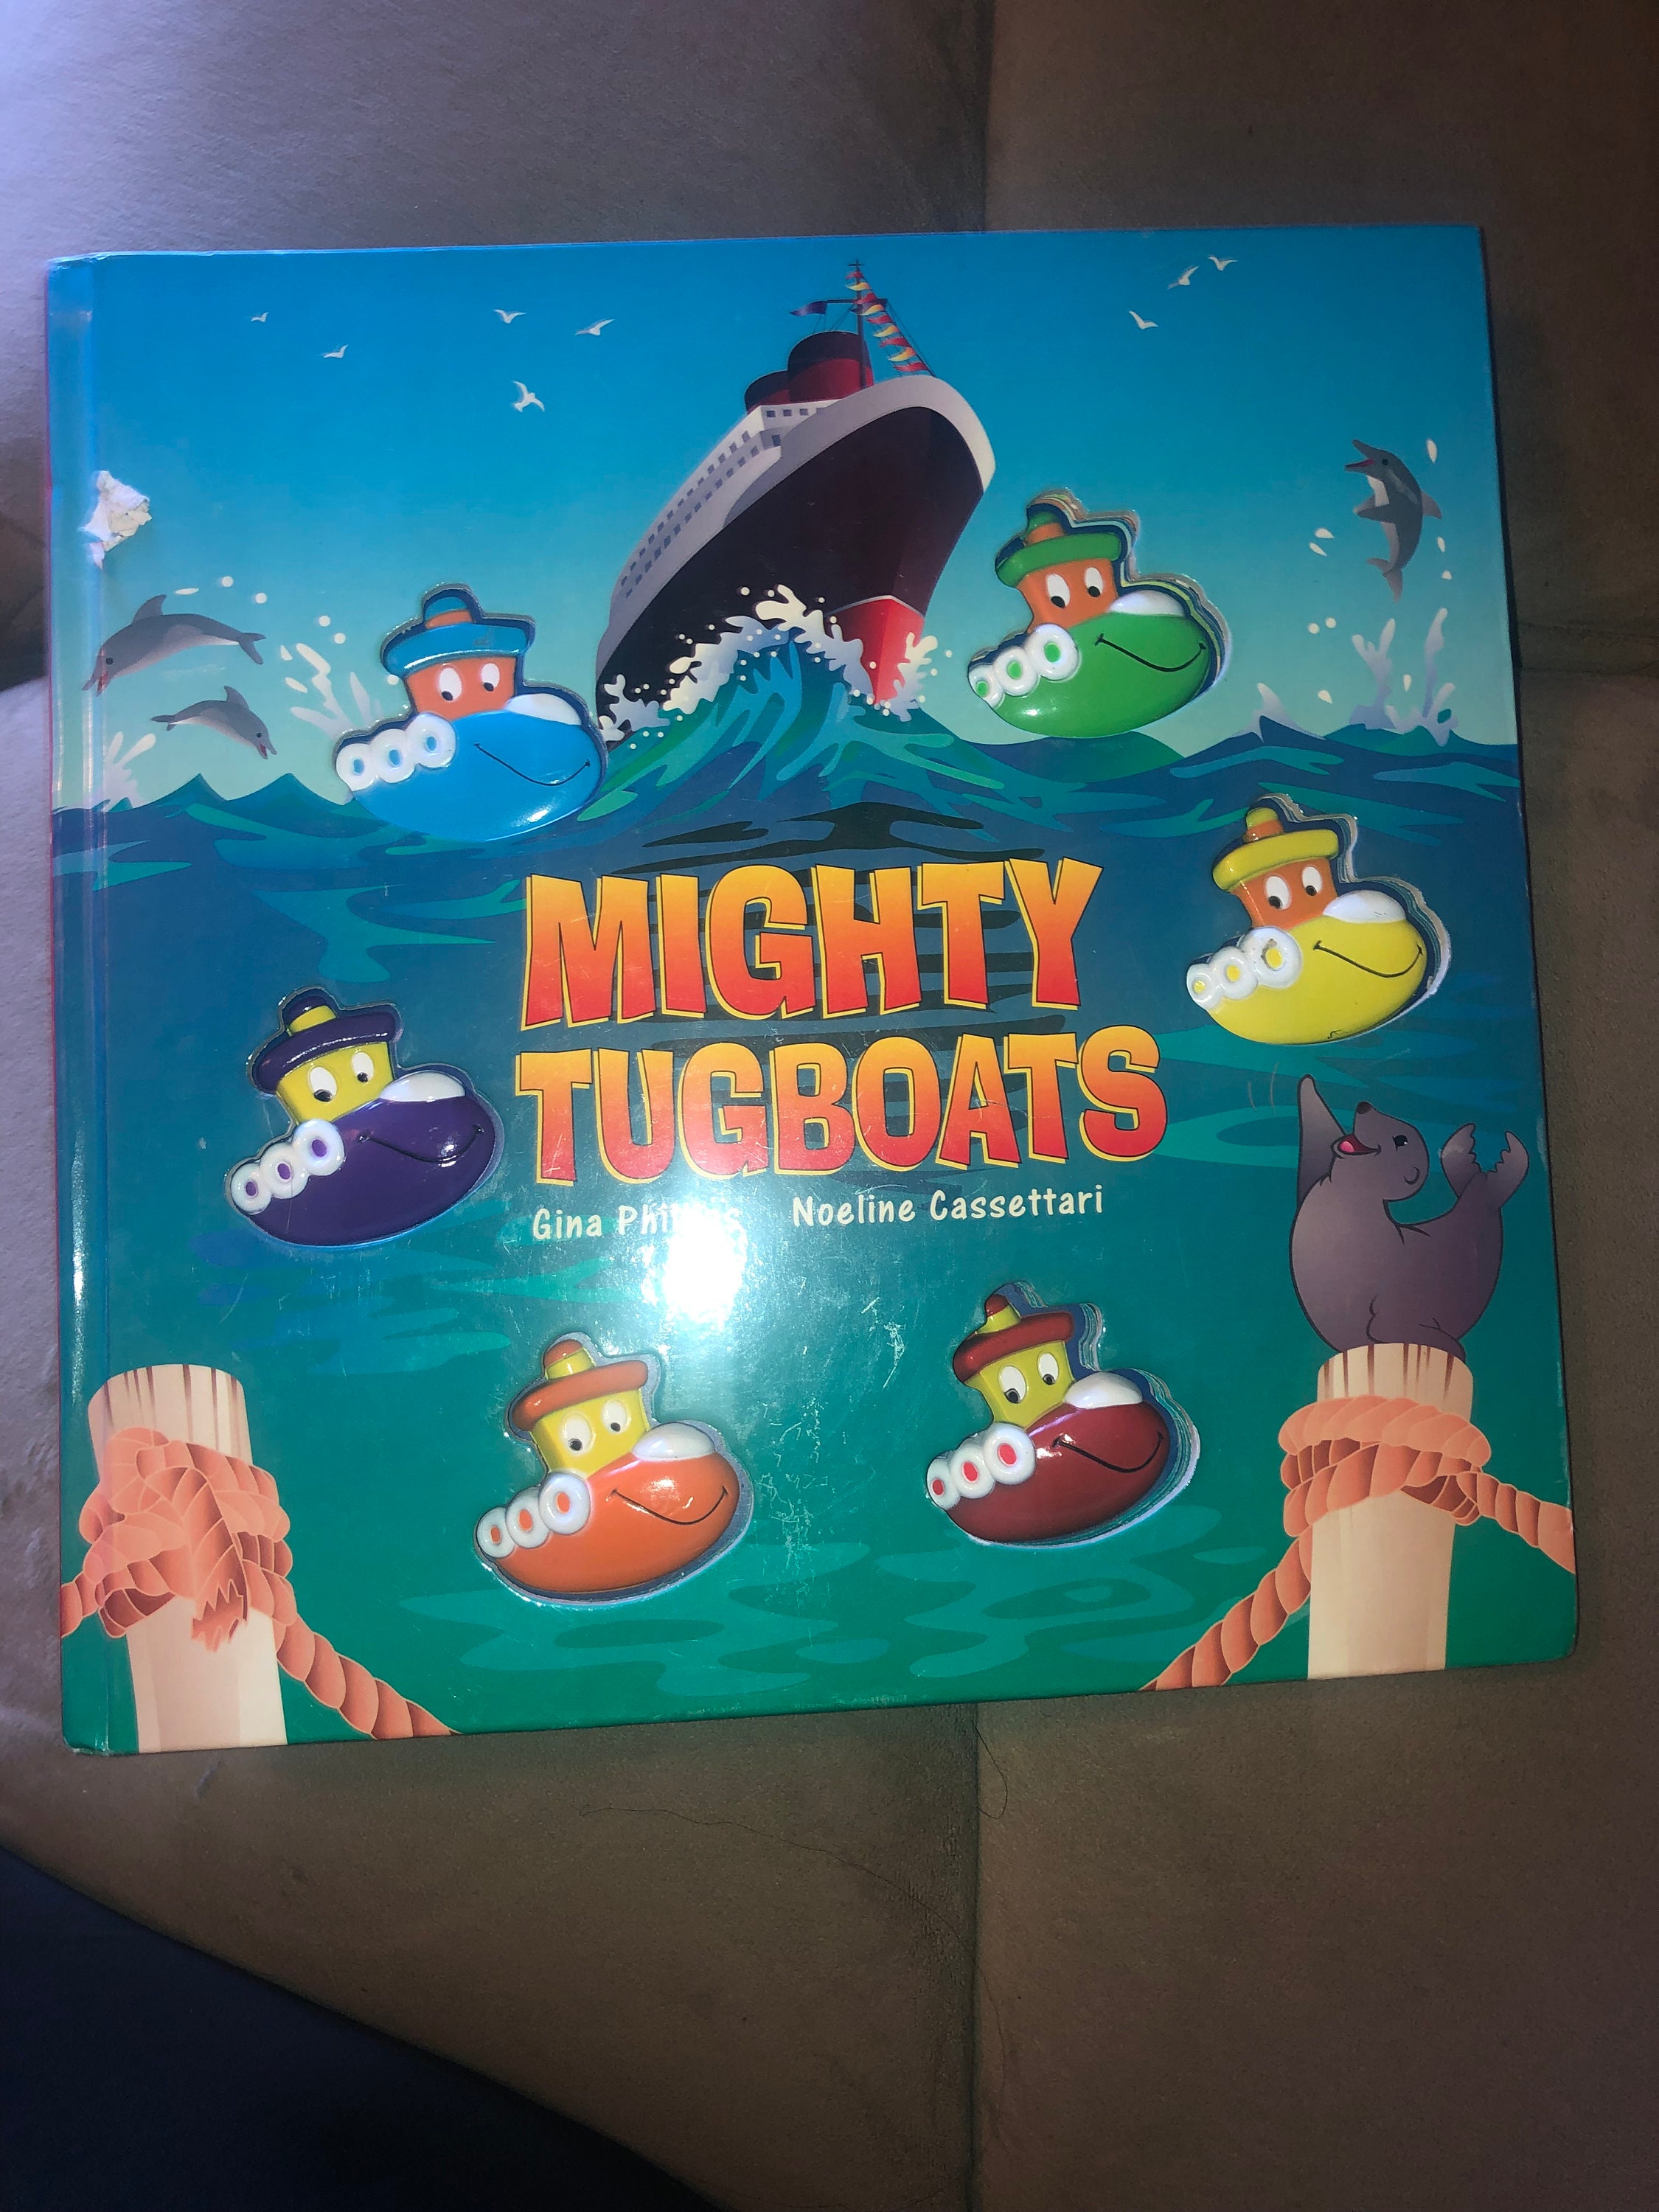 Tugboats　Mighty　Interactive　Book　Etsy